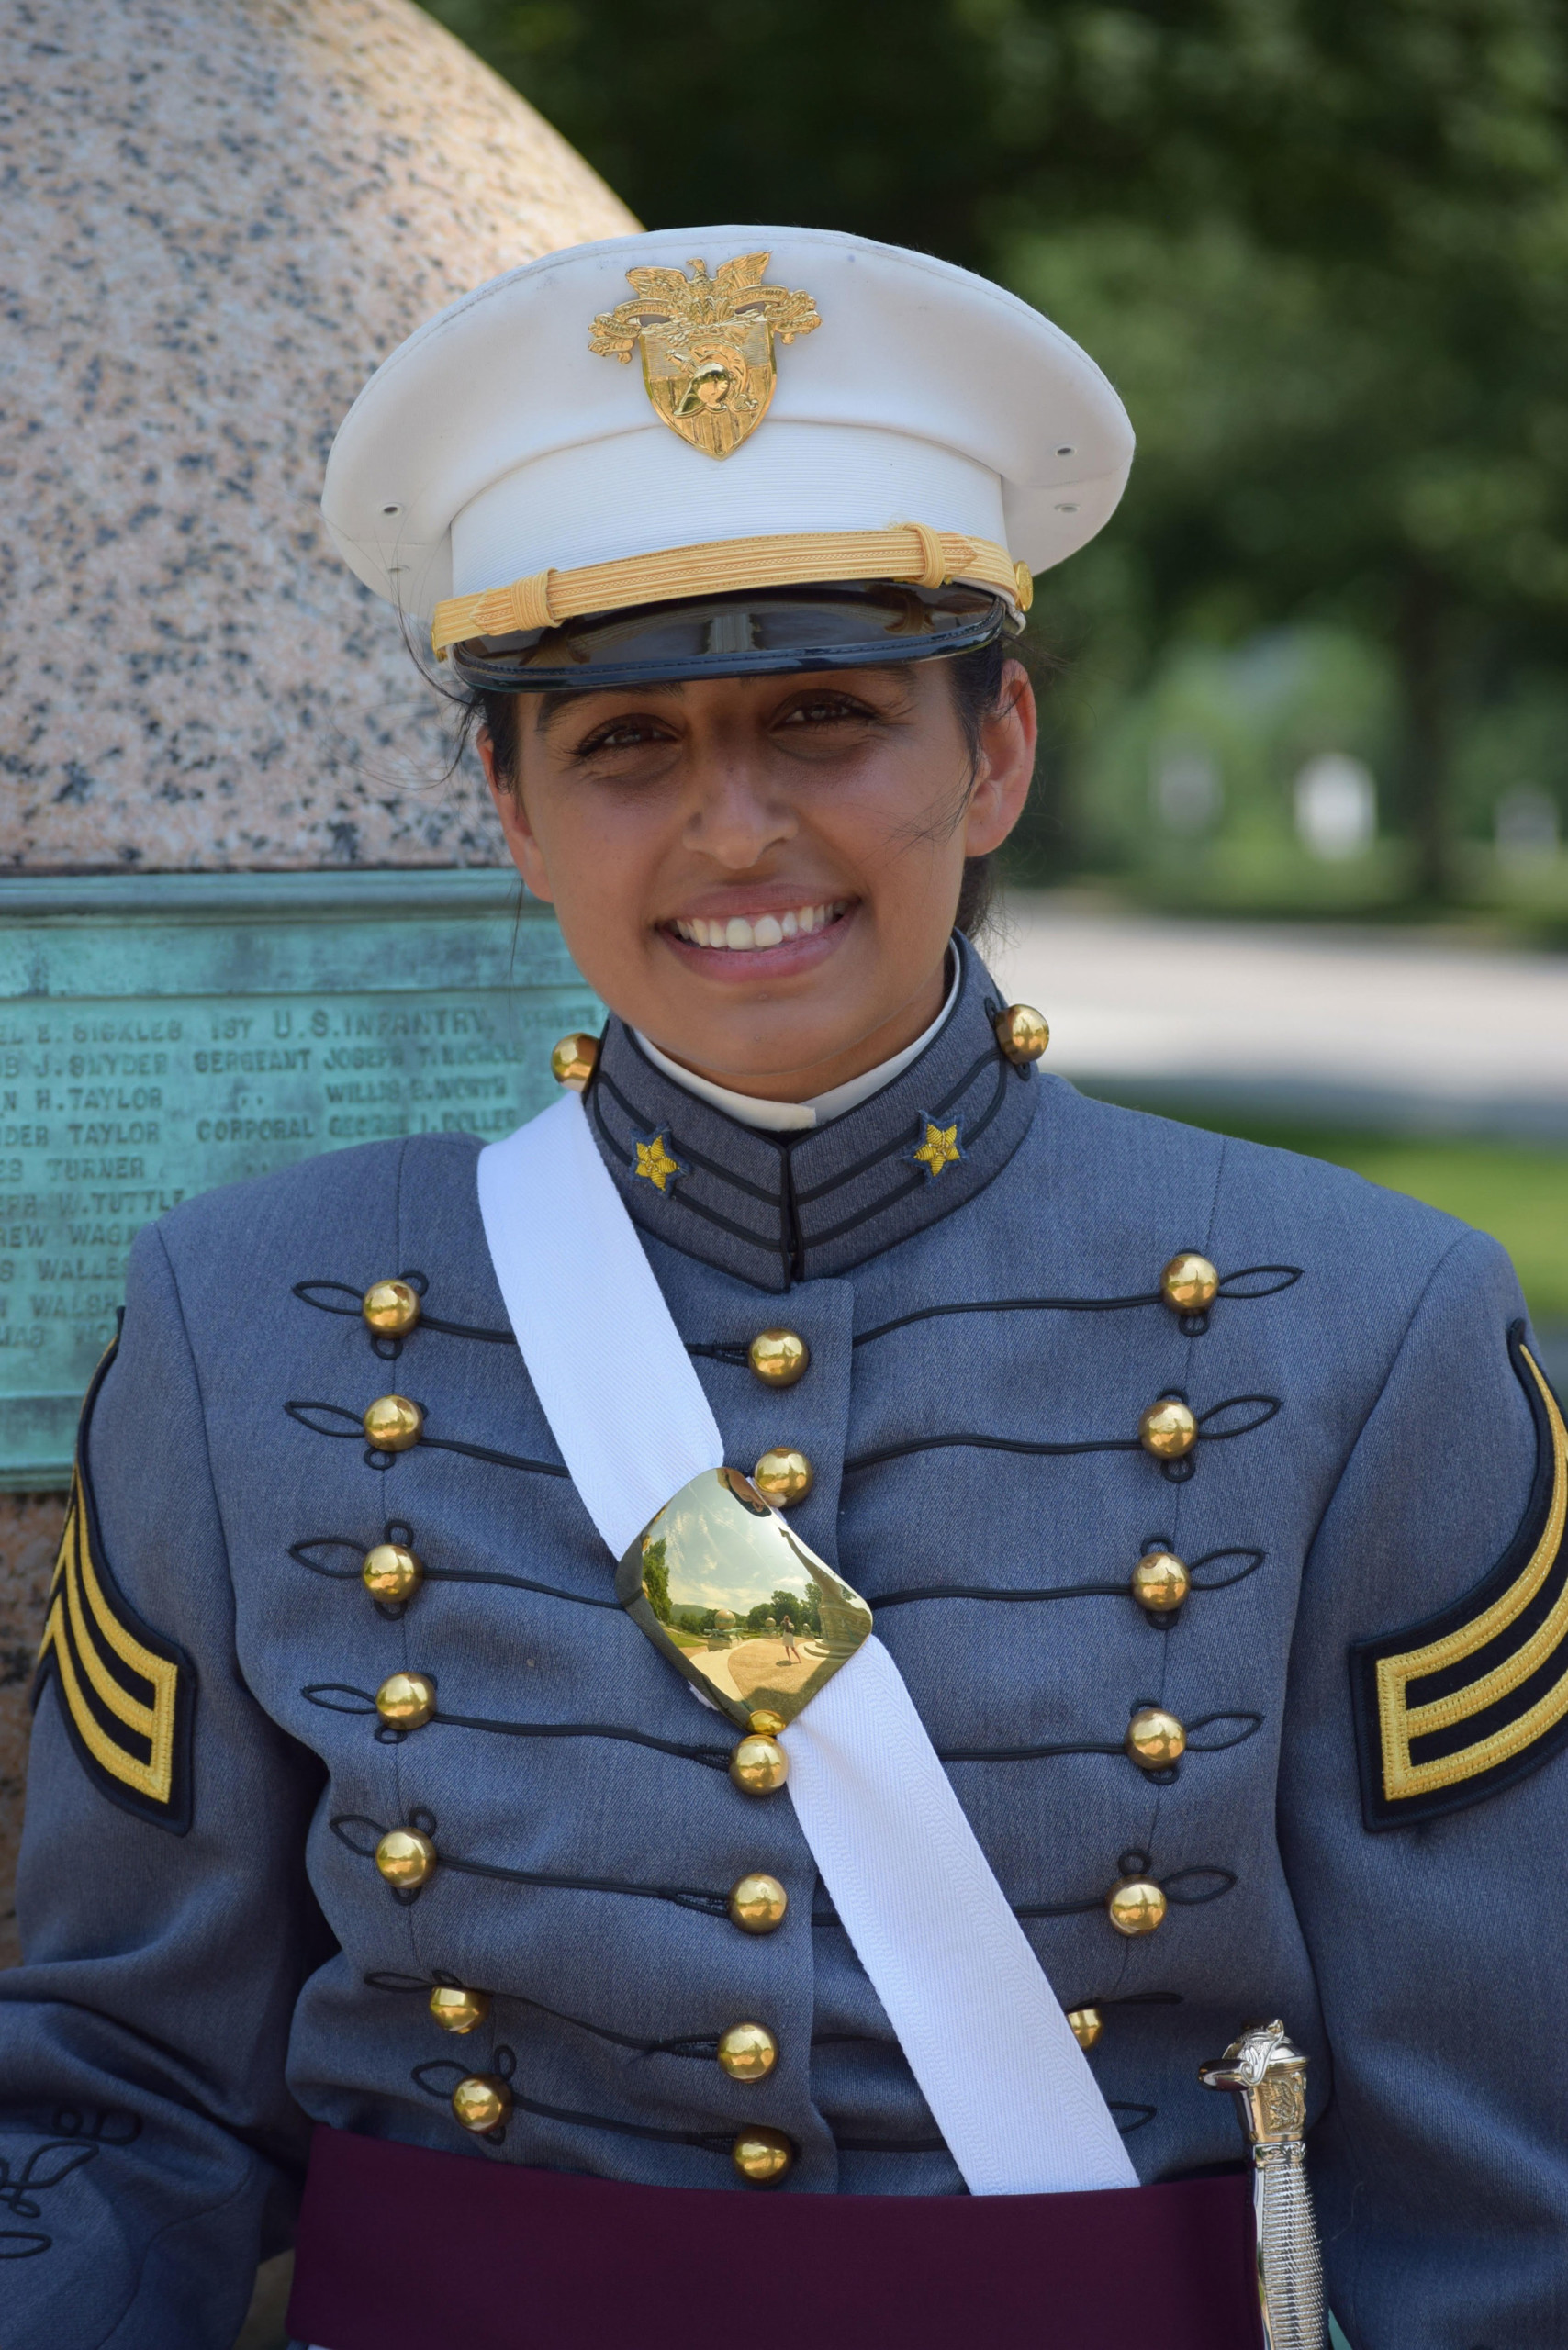 Woman first observant Sikh to graduate from the US Military